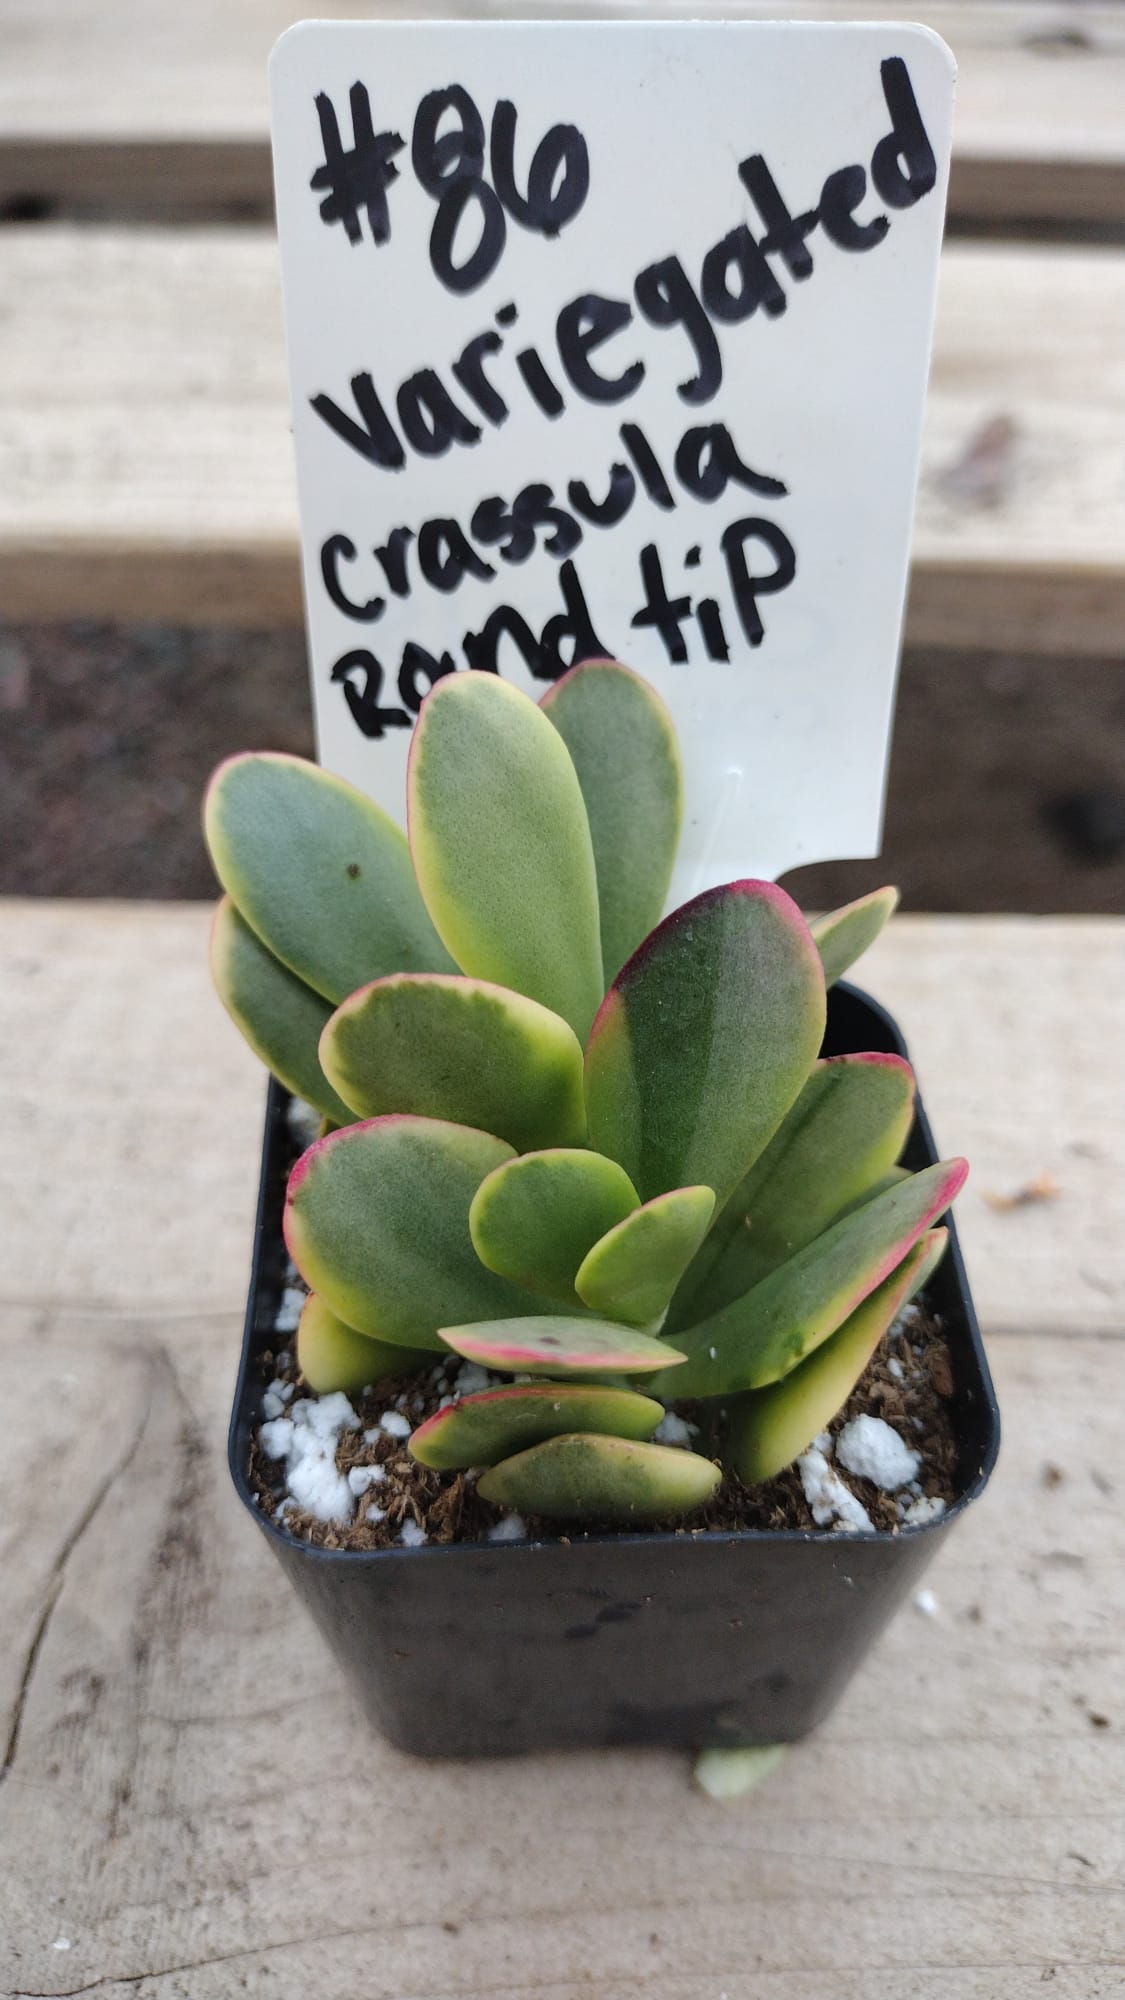 #86 Crassula Platyphylla Variegated-Succulent - Small - Exact 2in Type-The Succulent Source